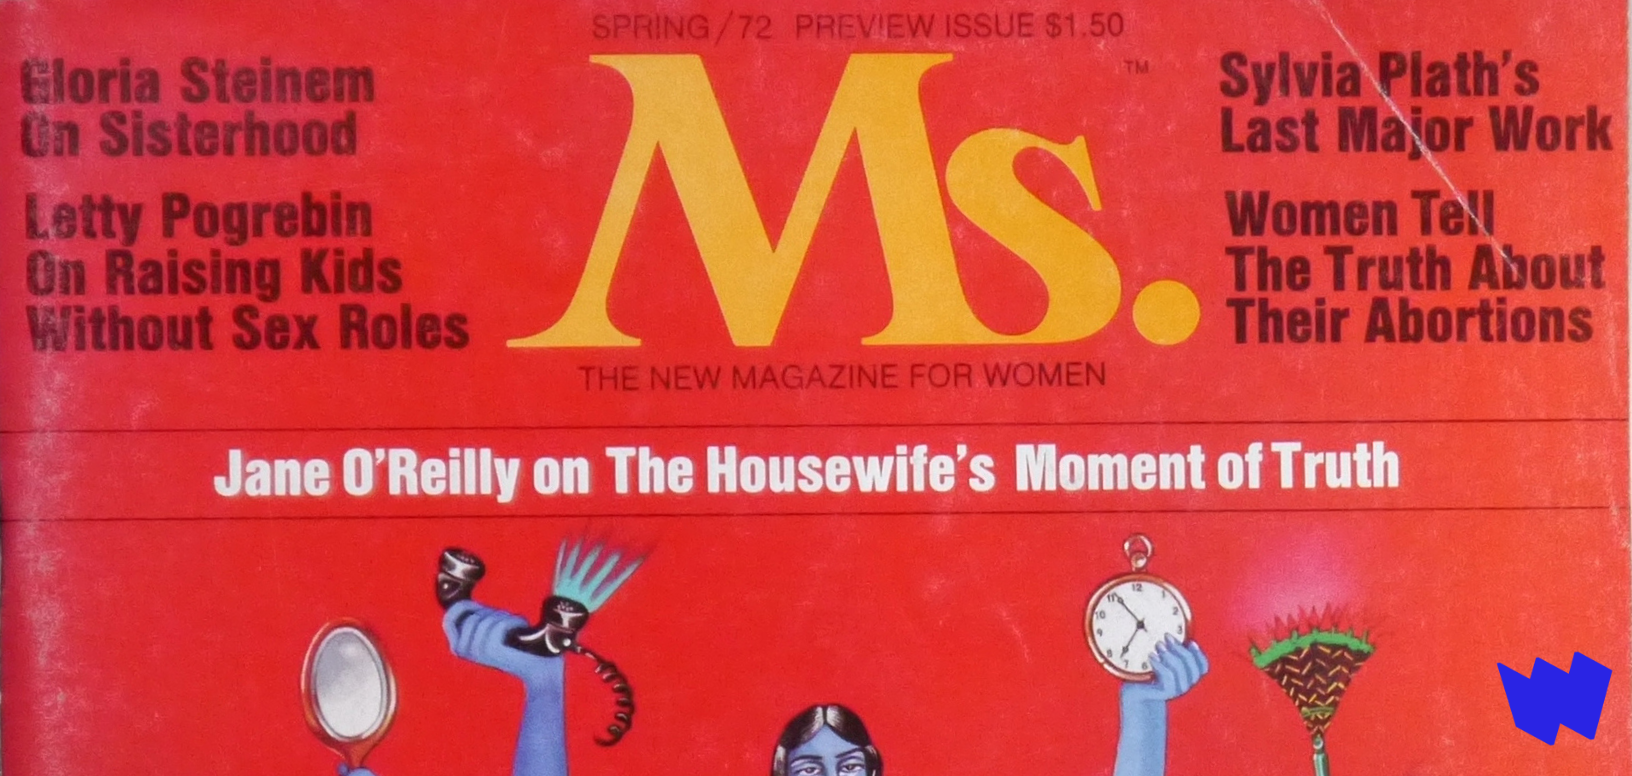 Ms. Magazine cover from 1972 -- cover is red and says "Jane O'Reilly on the Housewife's Moment of Truth" as well as "Gloria STeinem on Sisterhood," "Letty Pogrebin on Raising Kids Without Sex Roles," "Sylvia Plath's Last Major Work," "Women Tell the Truth About Their Abortions."